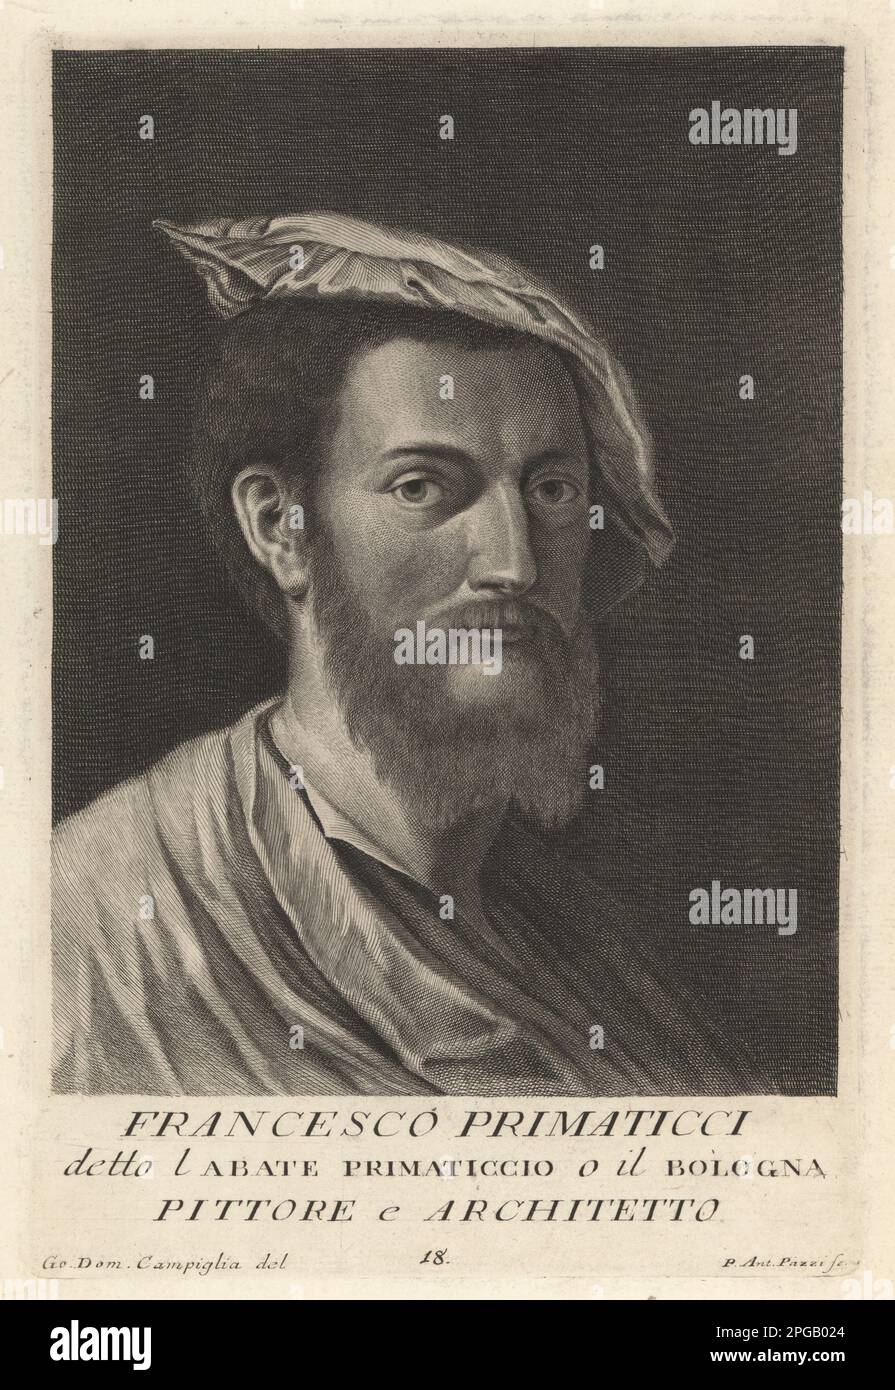 Francesco Primaticcio, Italian Mannerist painter, architect and sculptor who spent most of his career in France, 1504-1570. Worked with Giulio Romano in the Palazza del Te, and with il Rosso at Fontainbleau. Detto l'Abate Primaticcio o il Bologna. Copperplate engraving by Pietro Antonio Pazzi after Giovanni Domenico Campiglia after a self portrait by the artist from Francesco Moucke's Museo Florentino (Museum Florentinum), Serie di Ritratti de Pittori (Series of Portraits of Painters) stamperia Mouckiana, Florence, 1752-62. Stock Photo